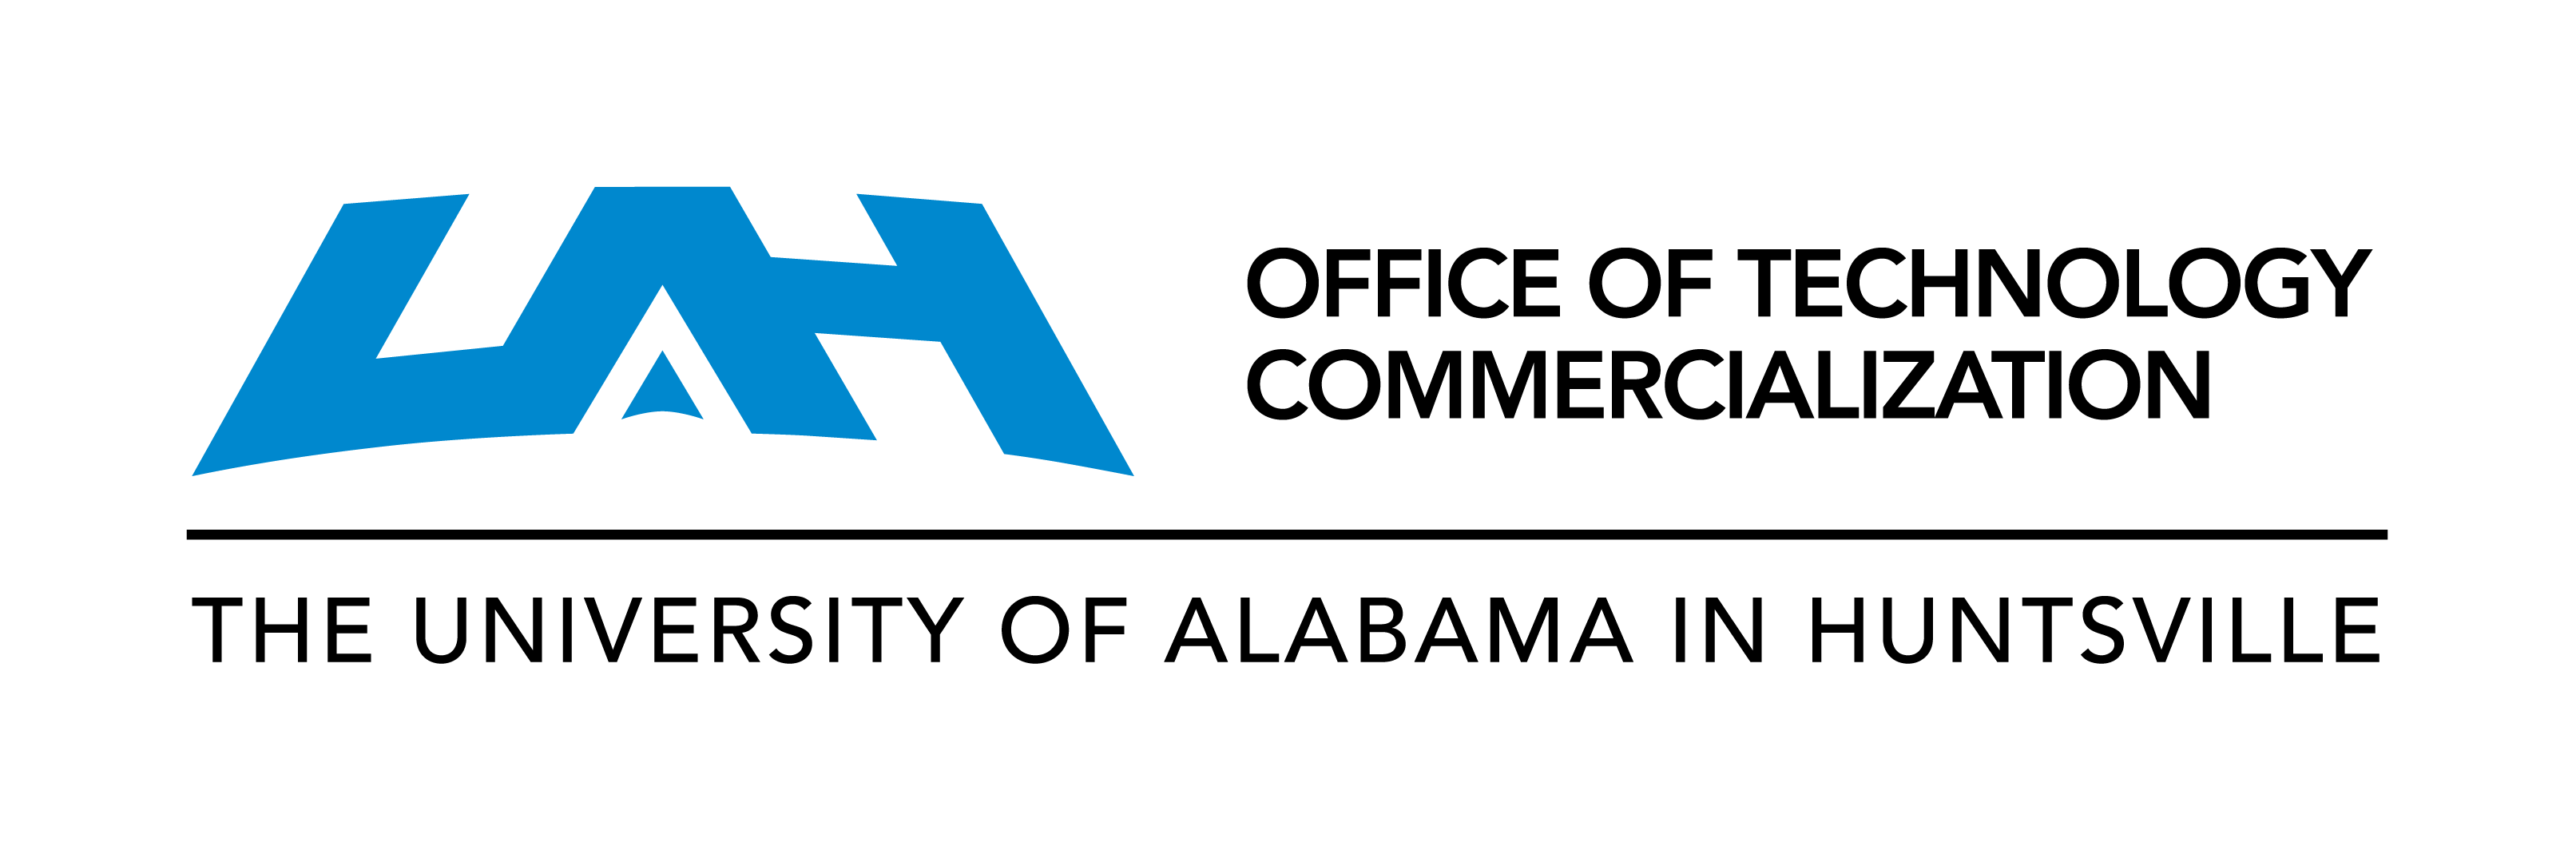 office of technology commercialization UAH logo.